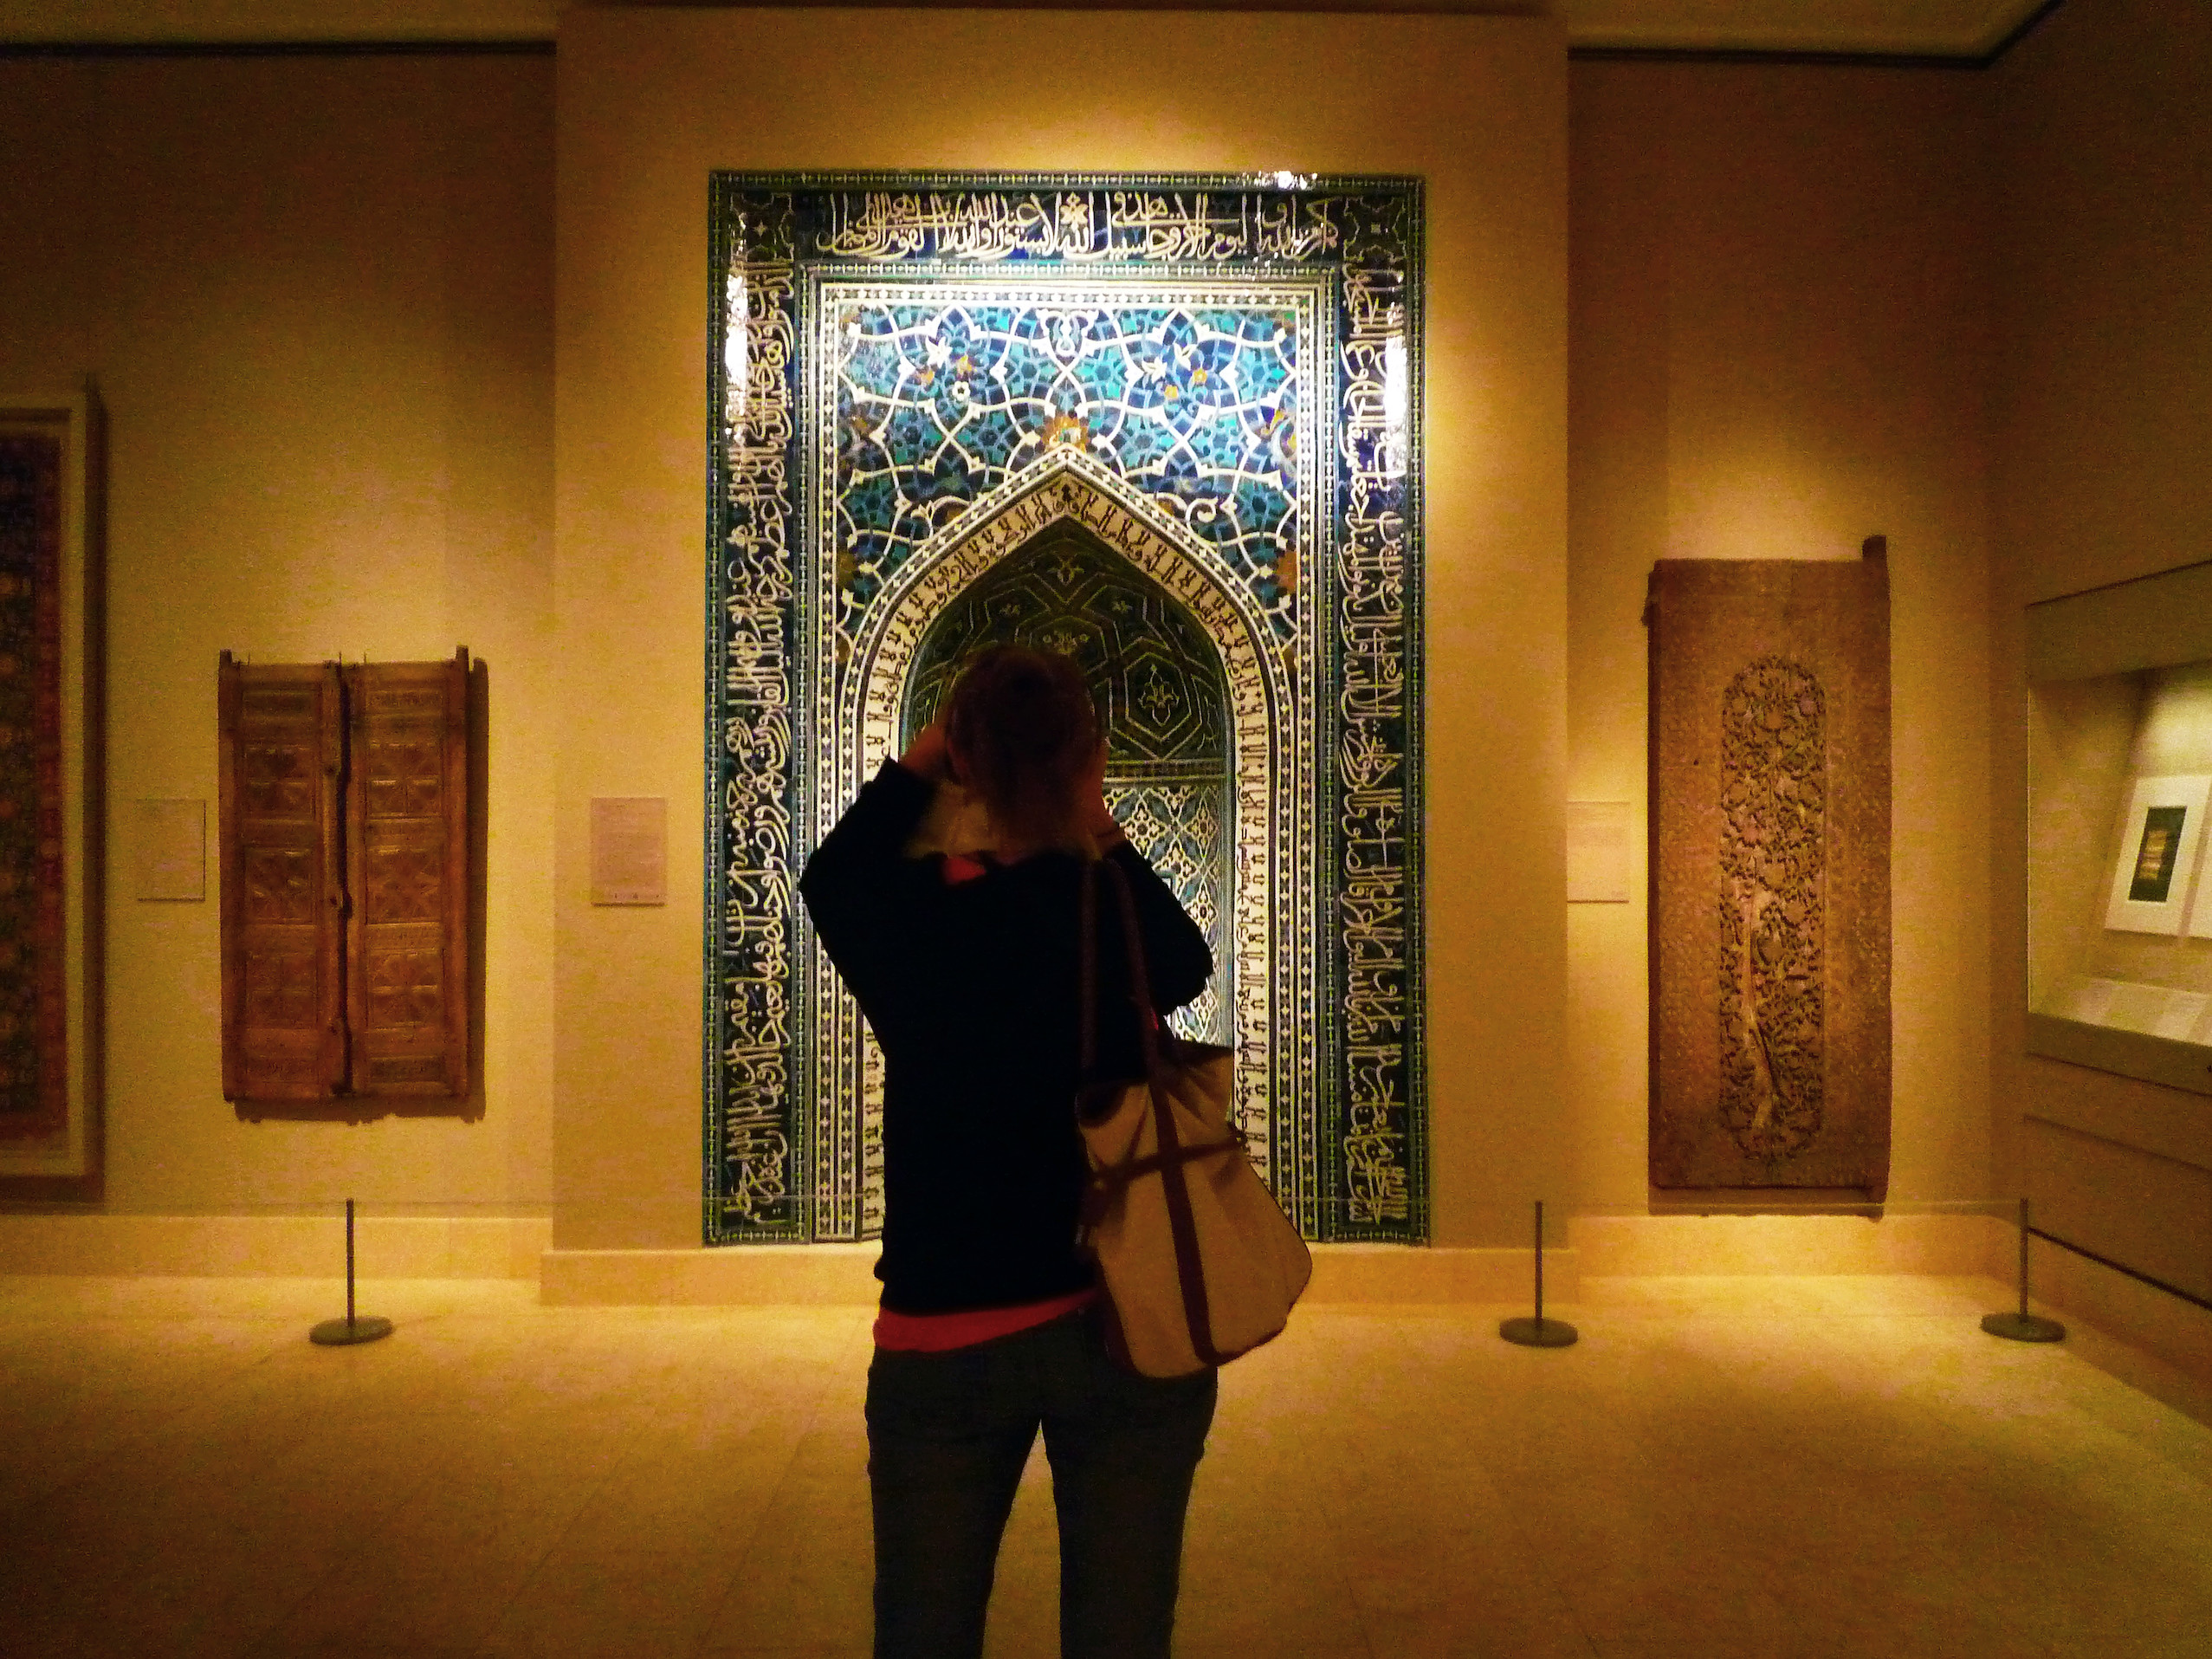 Photographer in front of Mihrab (prayer niche), 1354–55 (A.H. 755), just after the Ilkhanid period, Madrasa Imami, Isfahan, Iran, polychrome glazed tiles, 135-1/16 x 113-11/16 inches / 343.1 x 288.7 cm (Metropolitan Museum of Art, New York)